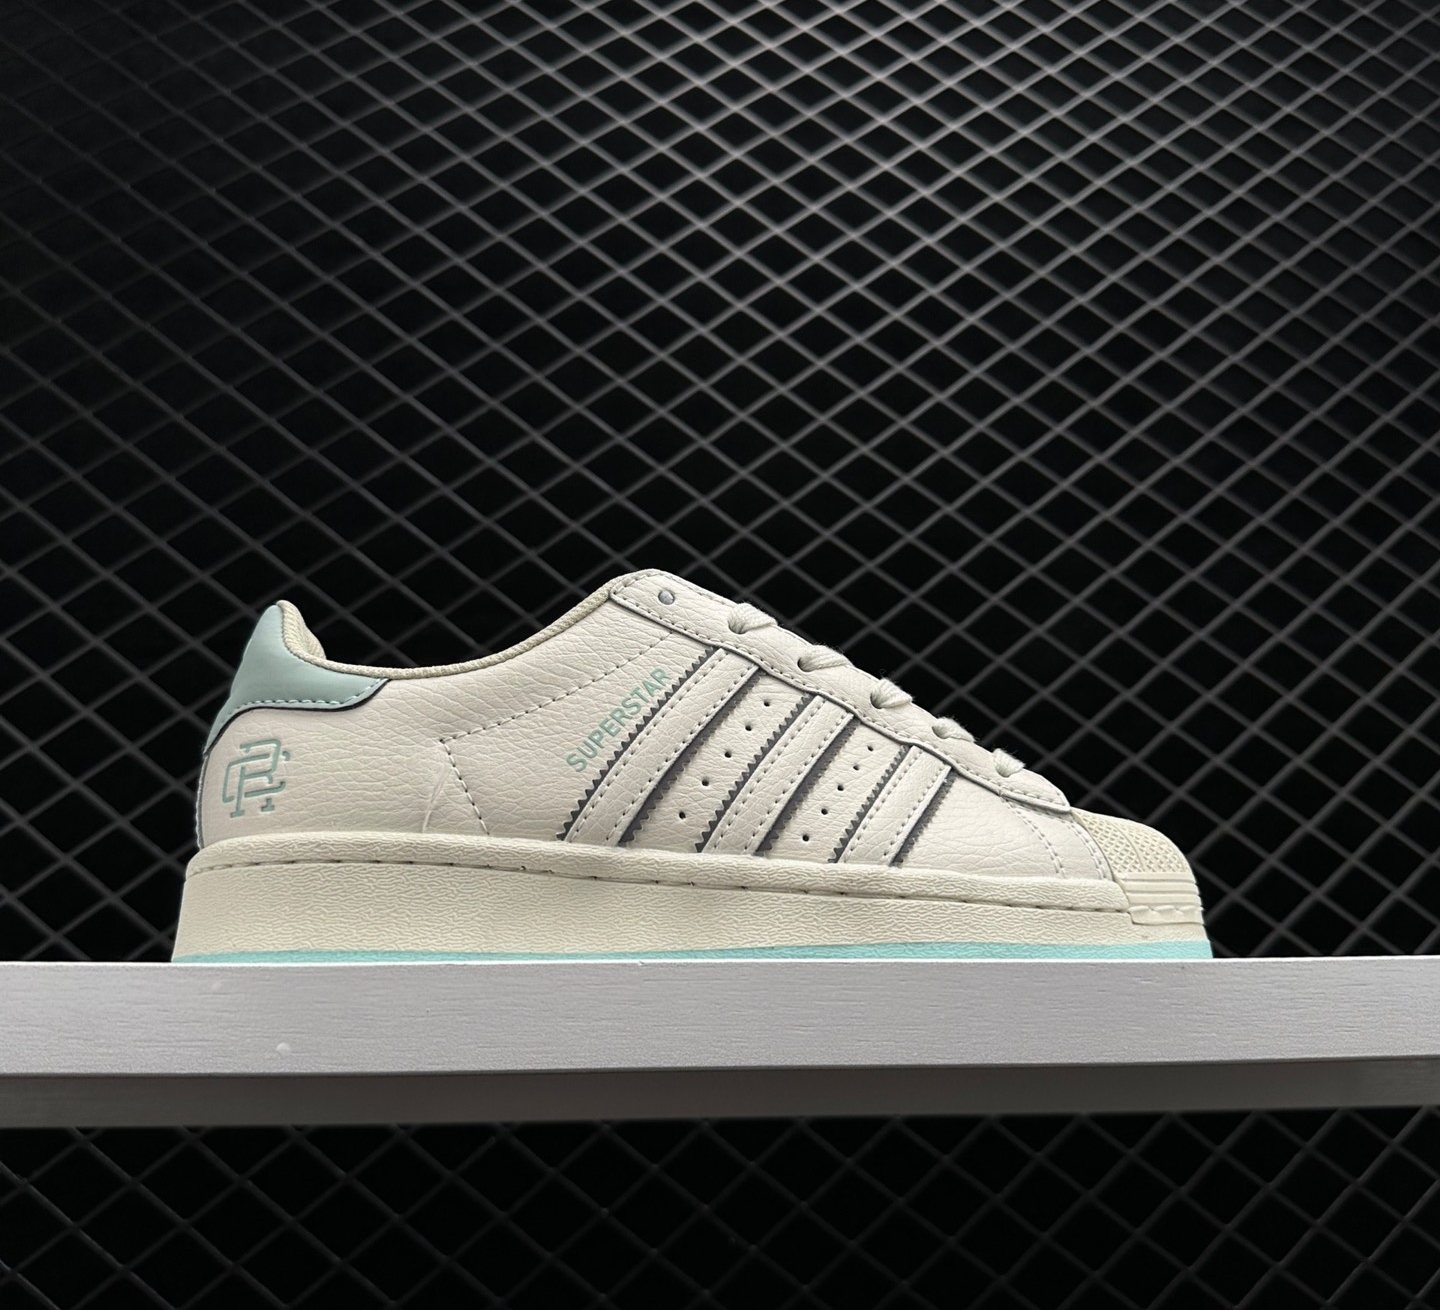 Adidas Originals Superstar White Blue HR046 - Stylish and Iconic Sneakers